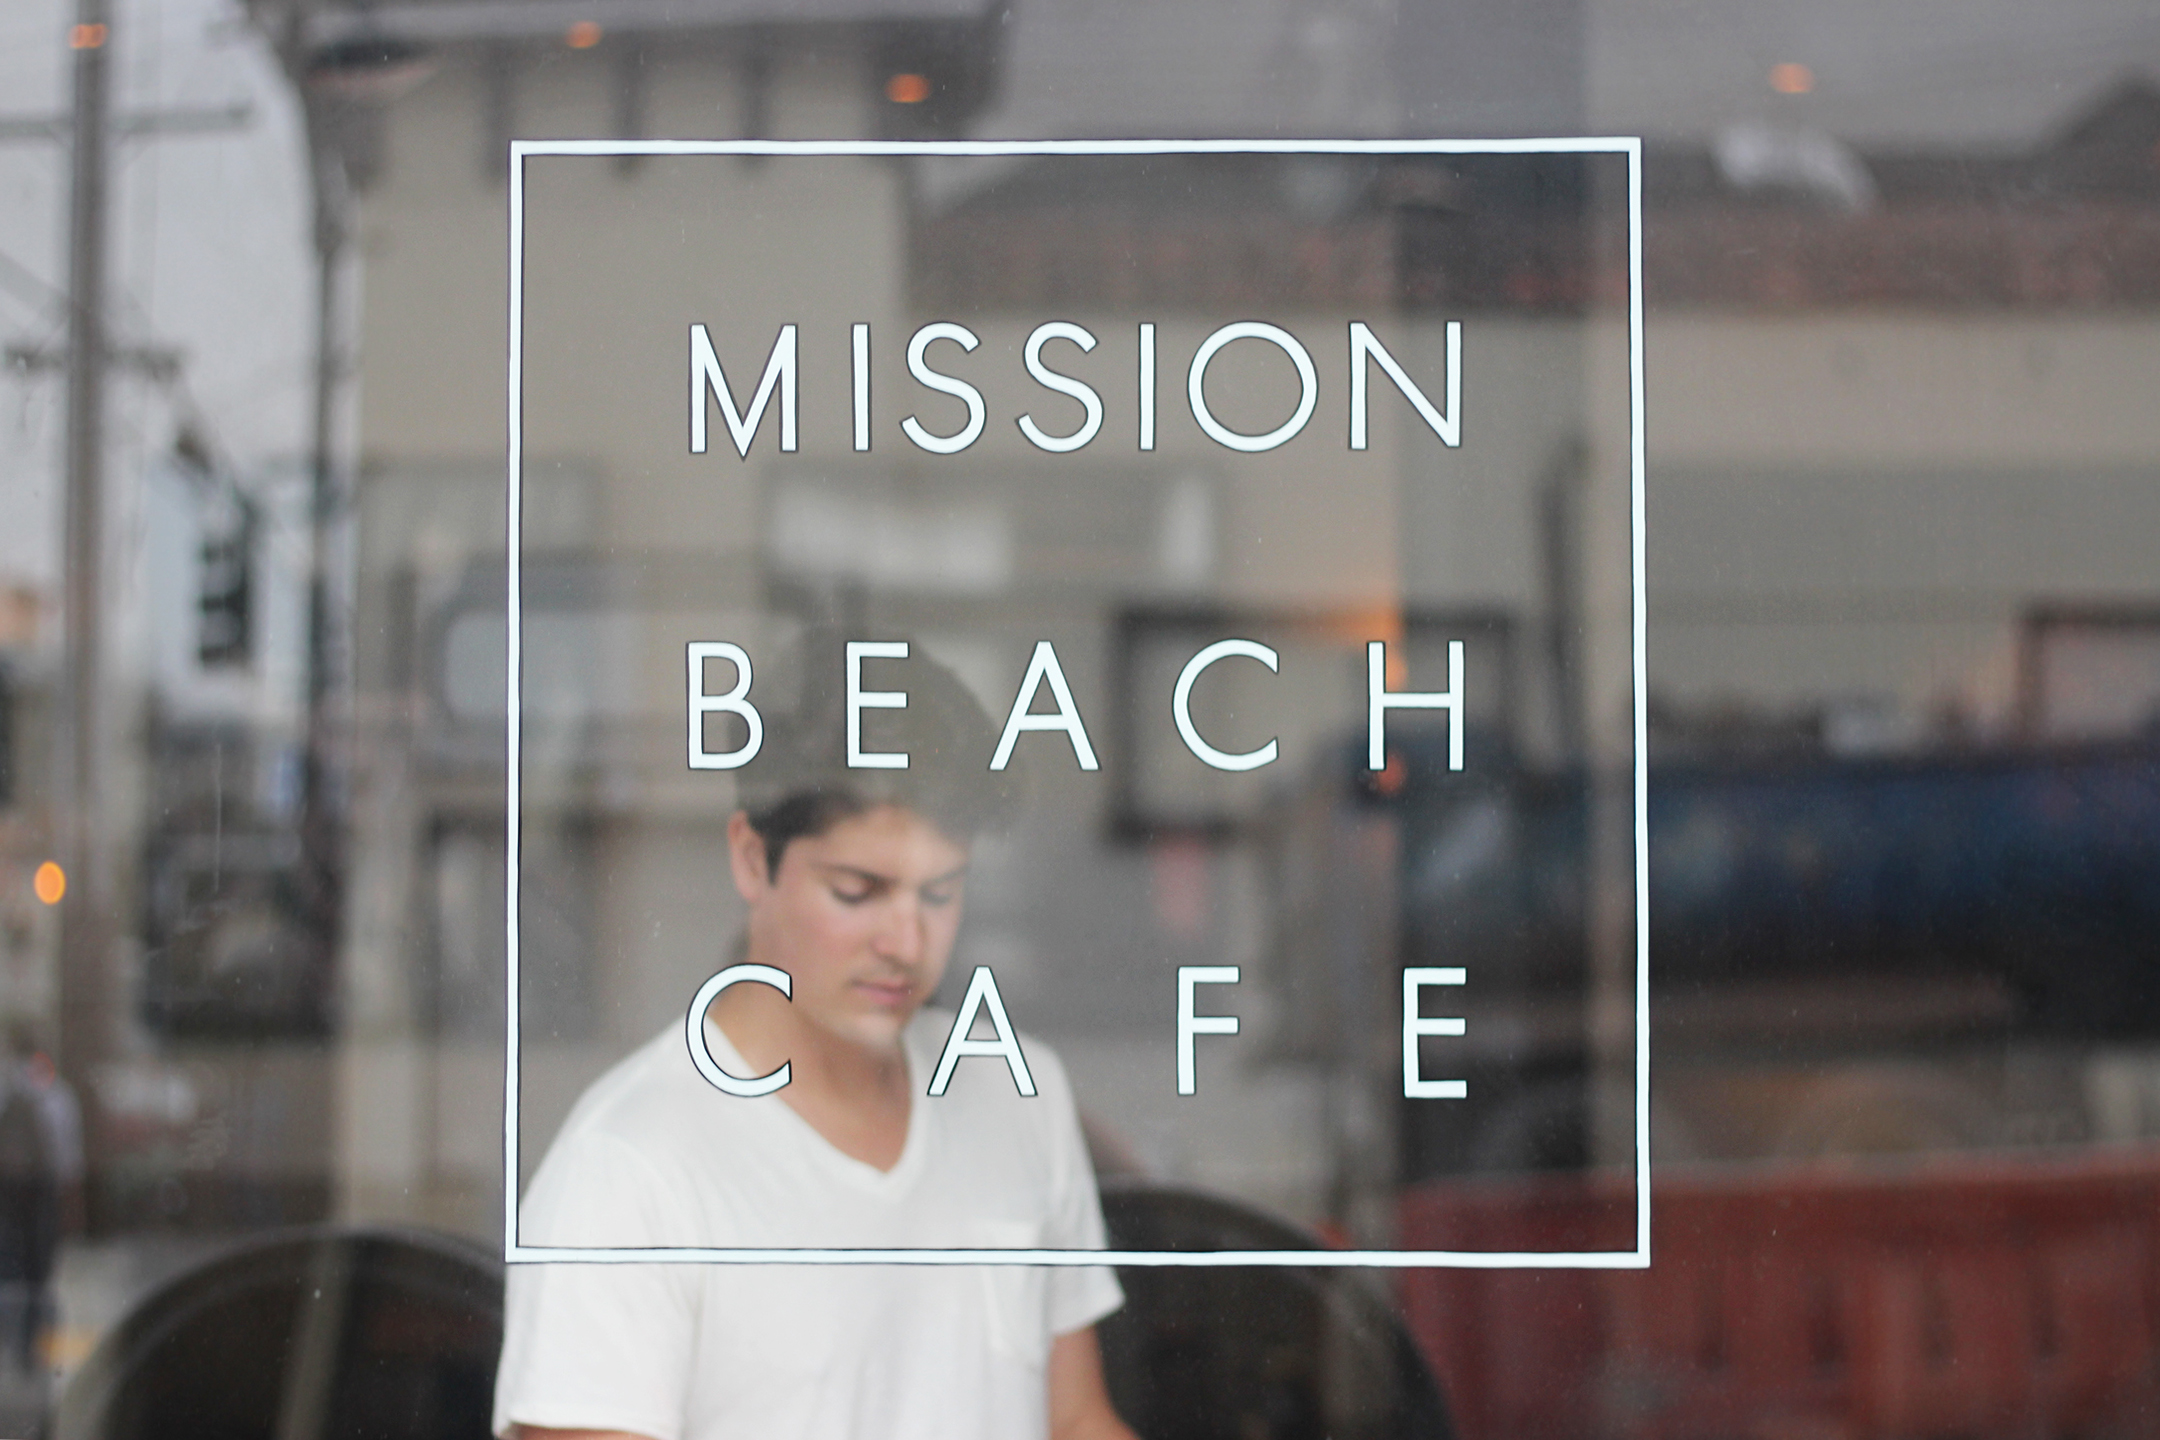 MISSION BEACH CAFE